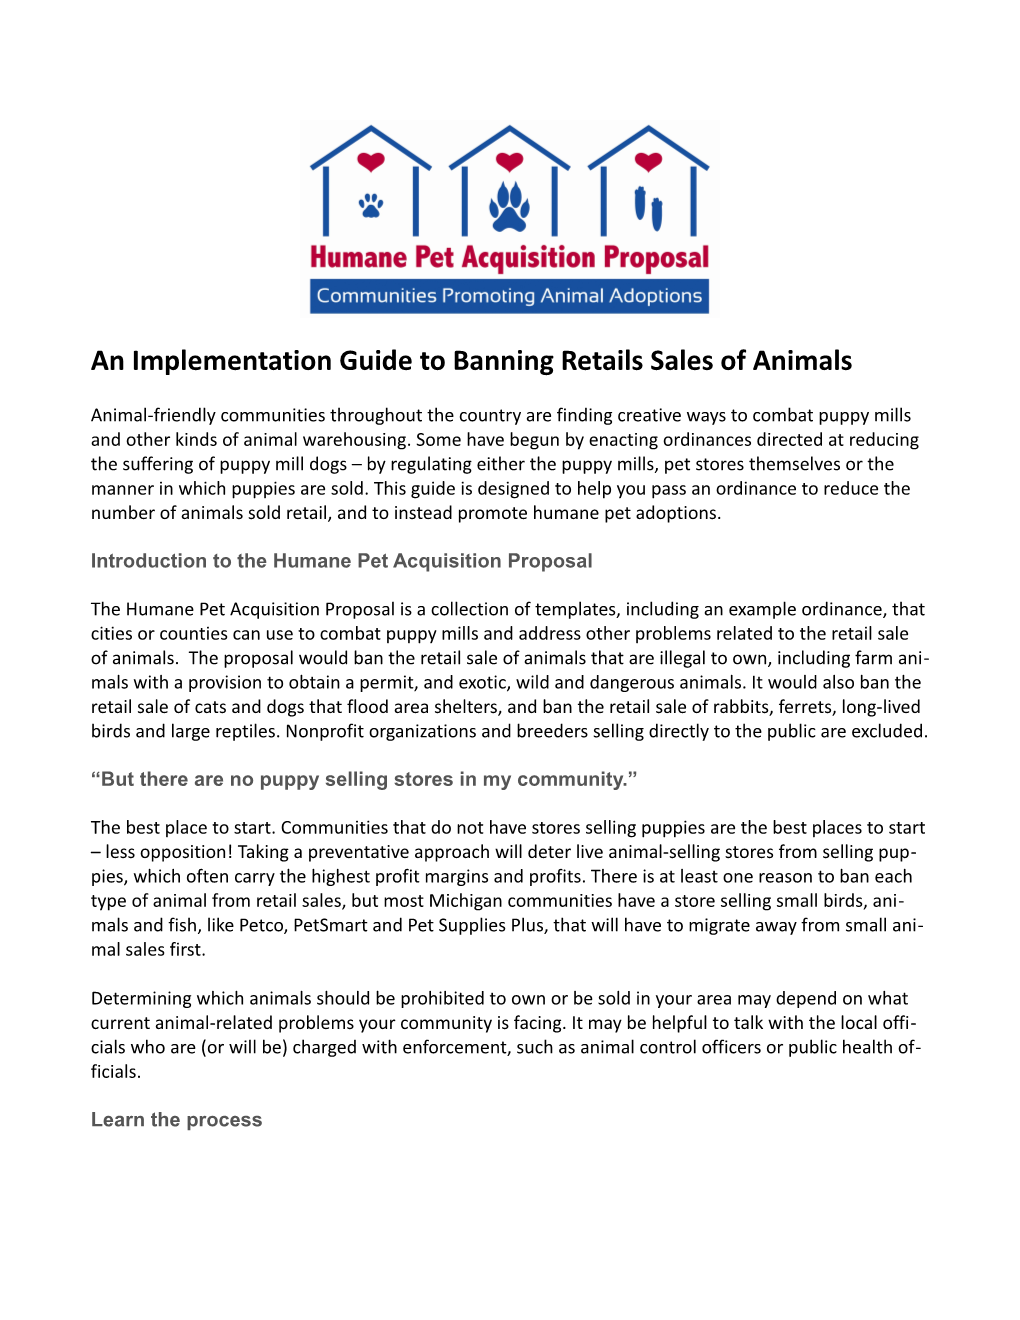 An Implementation Guide to Banning Retails Sales of Animals